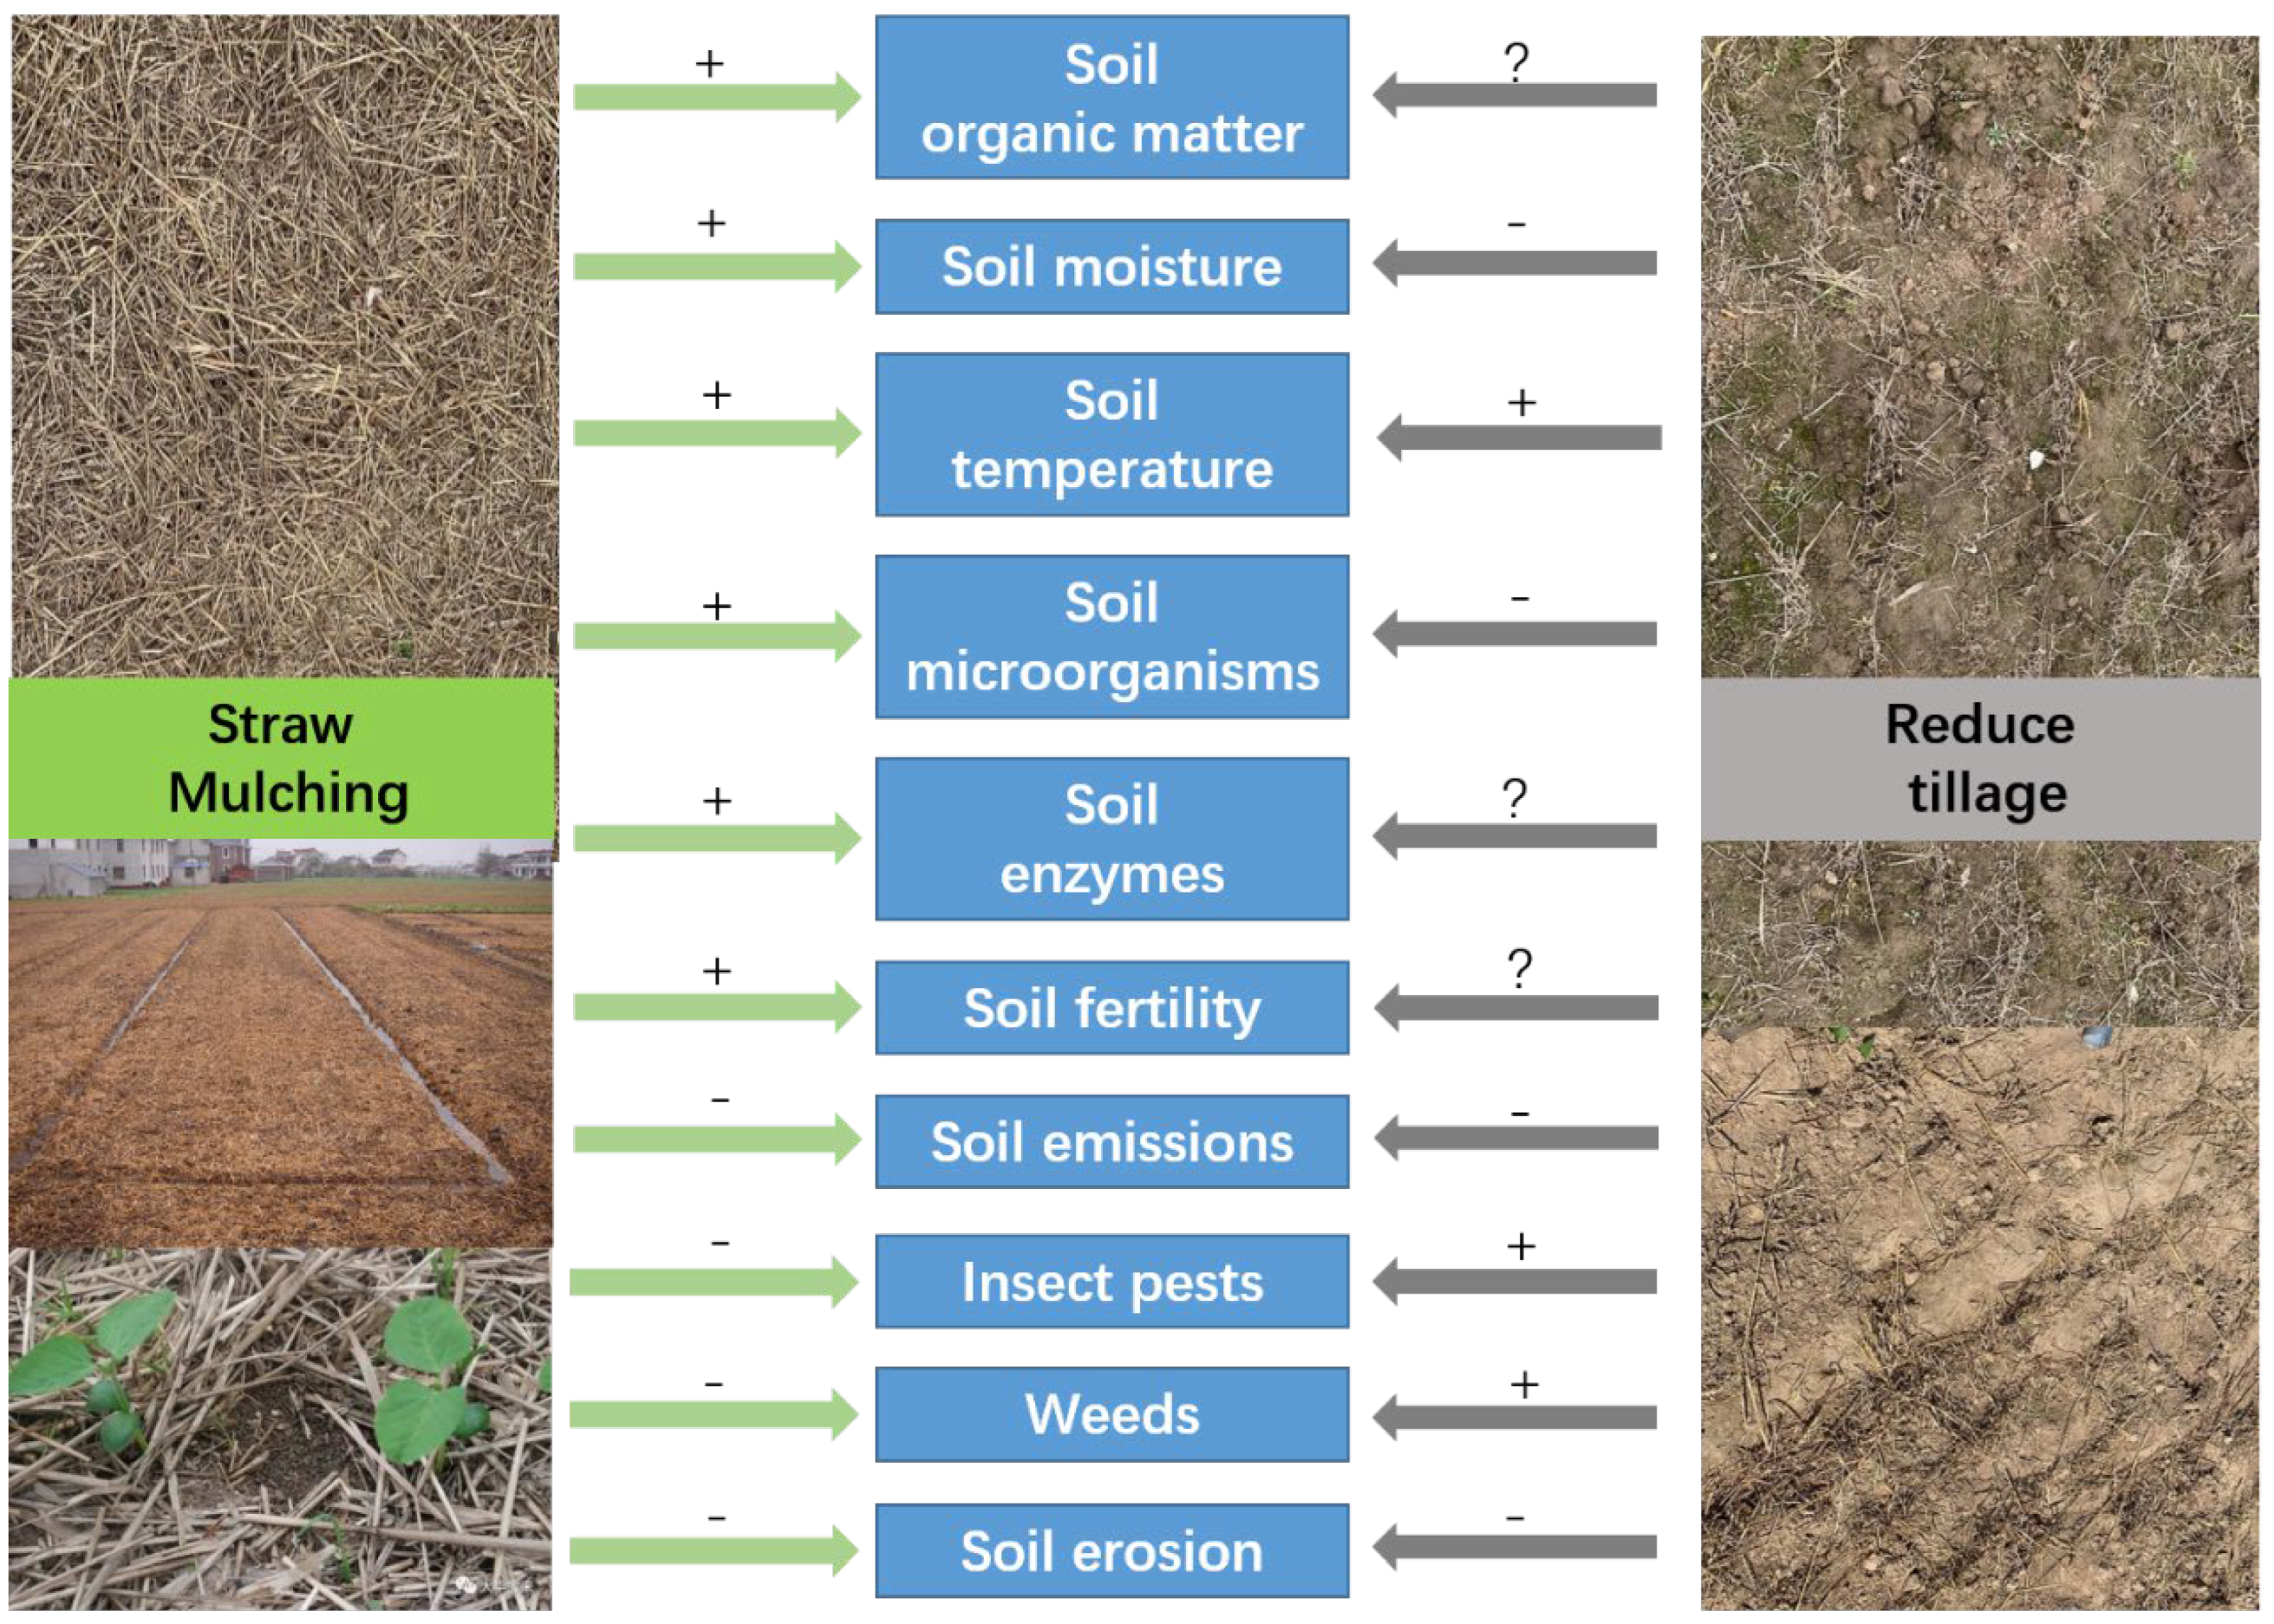 Compare the Use of Manure And Fertilizers in Maintaining Soil Fertility: Benefits Revealed